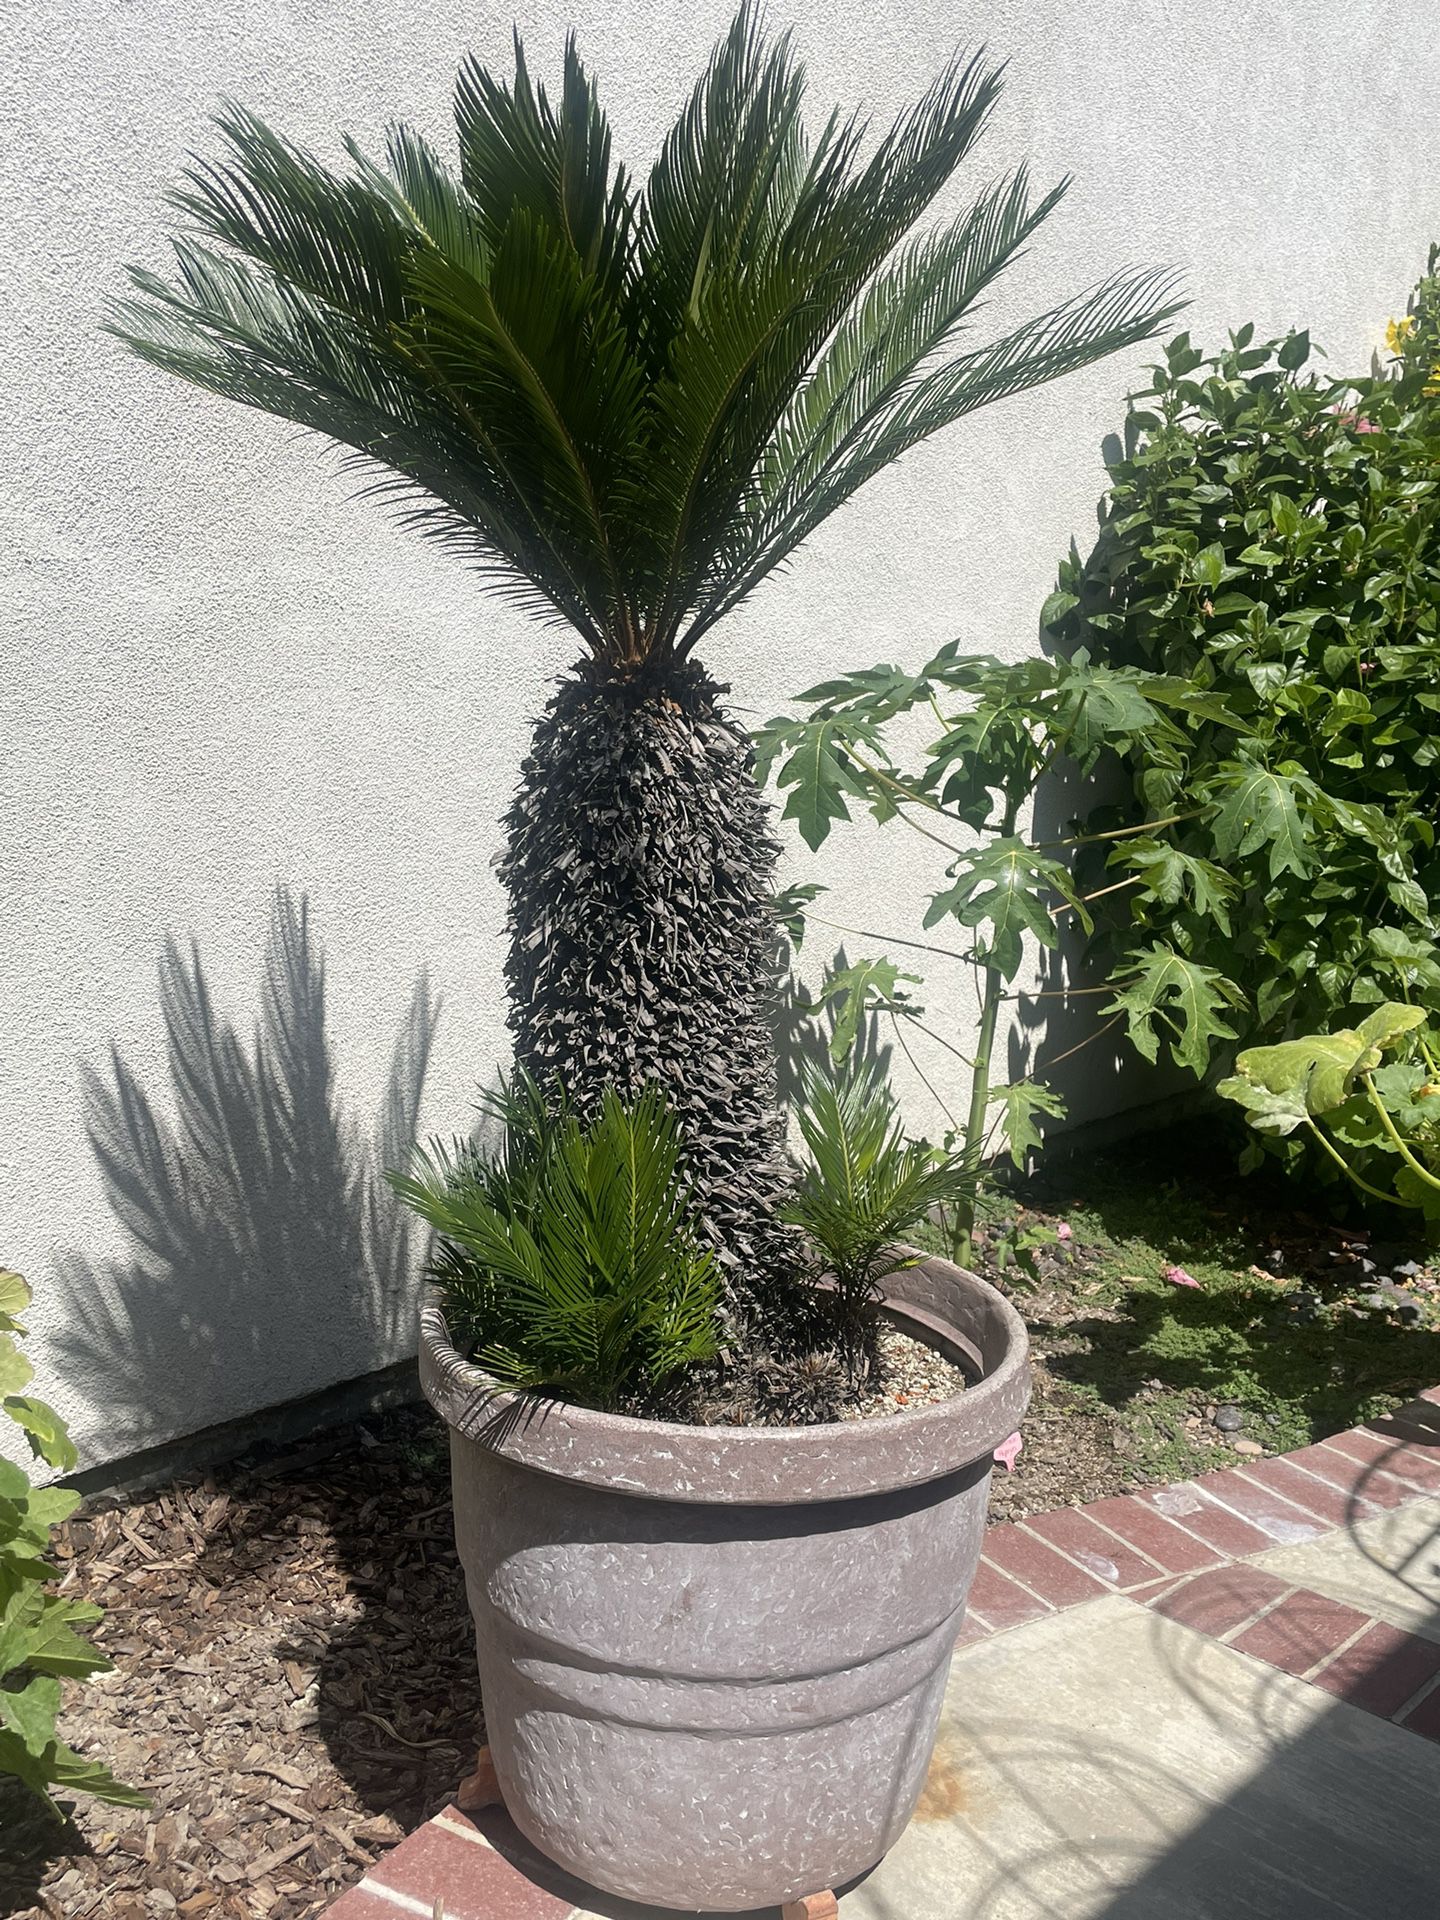 2 Large, Healthy Sago Palms For Sale